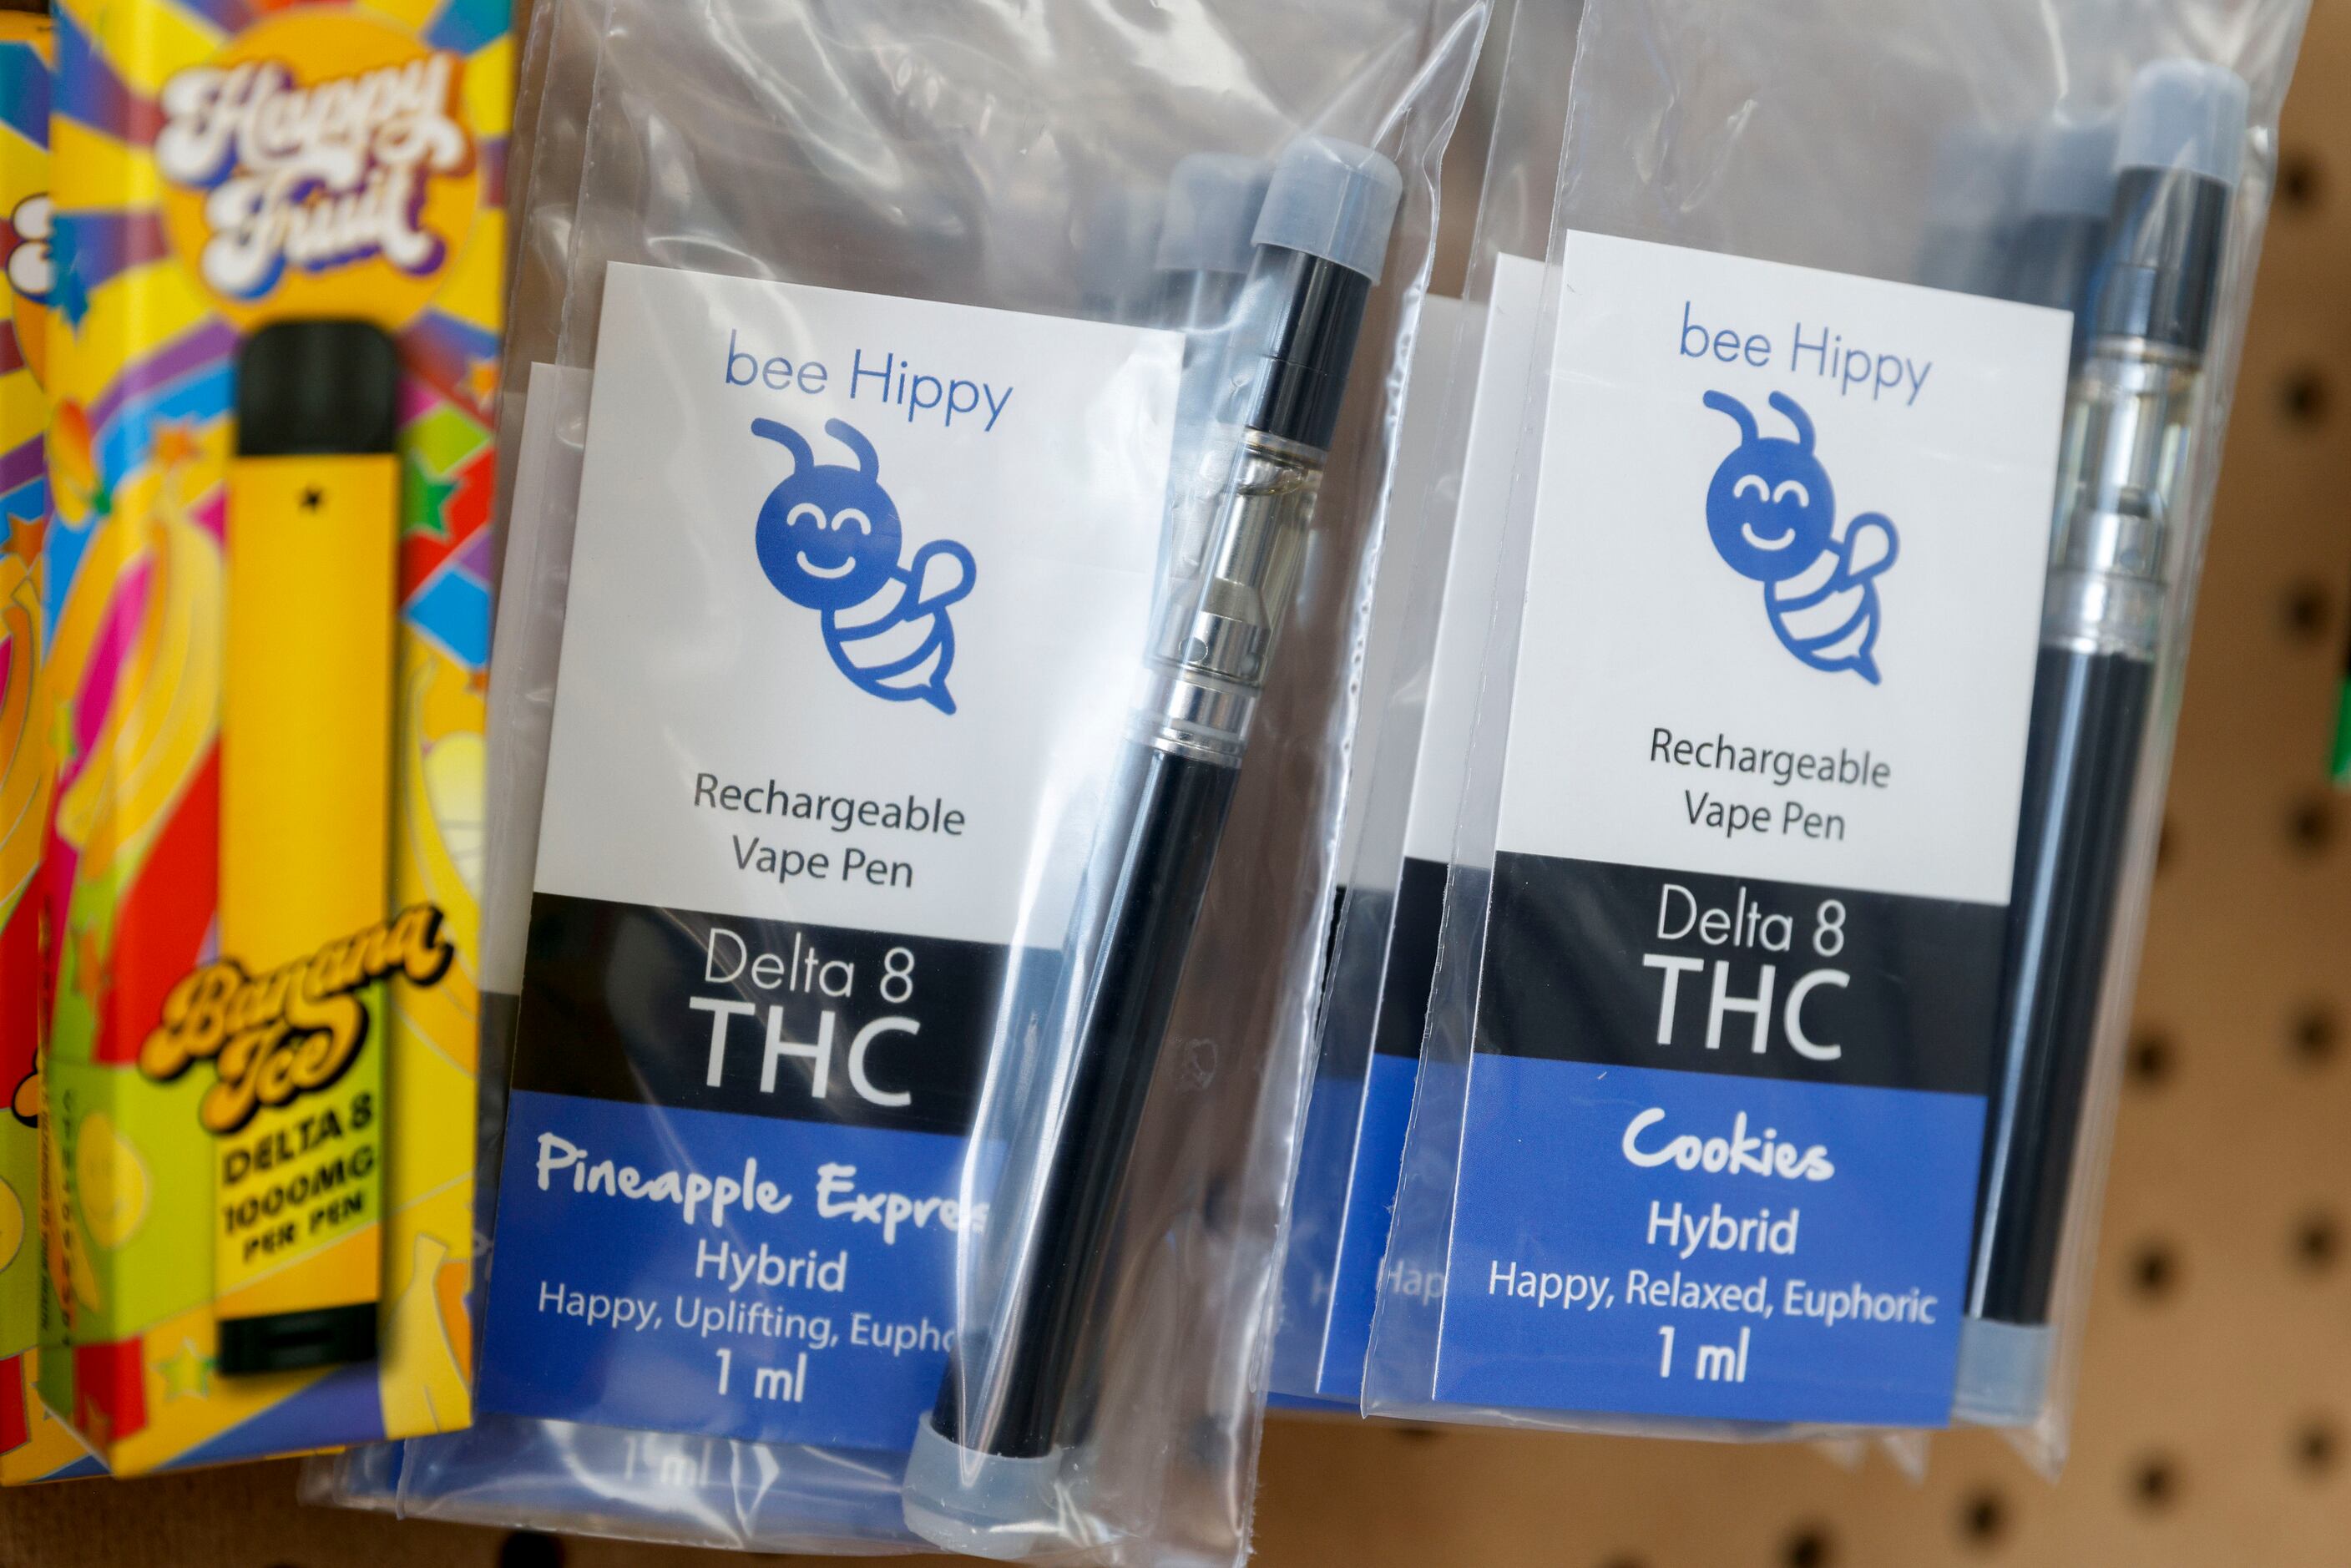 Products for sale inside the Bee Hippy showroom include a number of edibles that contain...